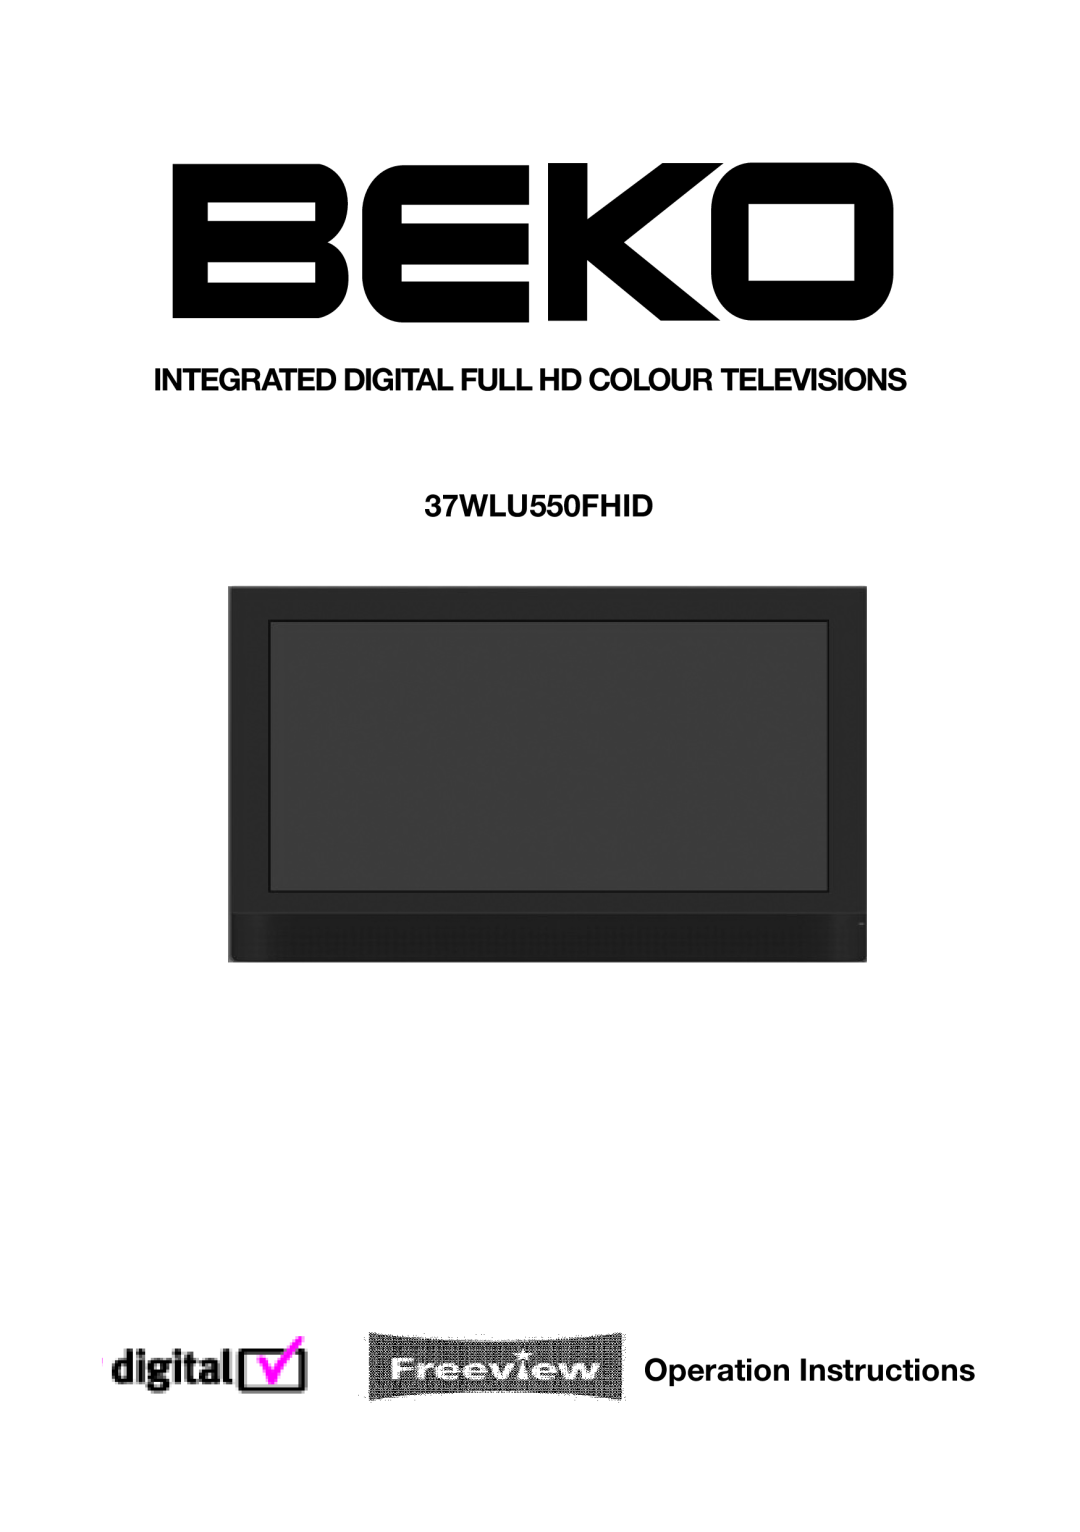 Beko manual INTEGRATED DIGITAL FULL HD COLOUR TELEVISIONS 37WLU550FHID, Operation Instructions 